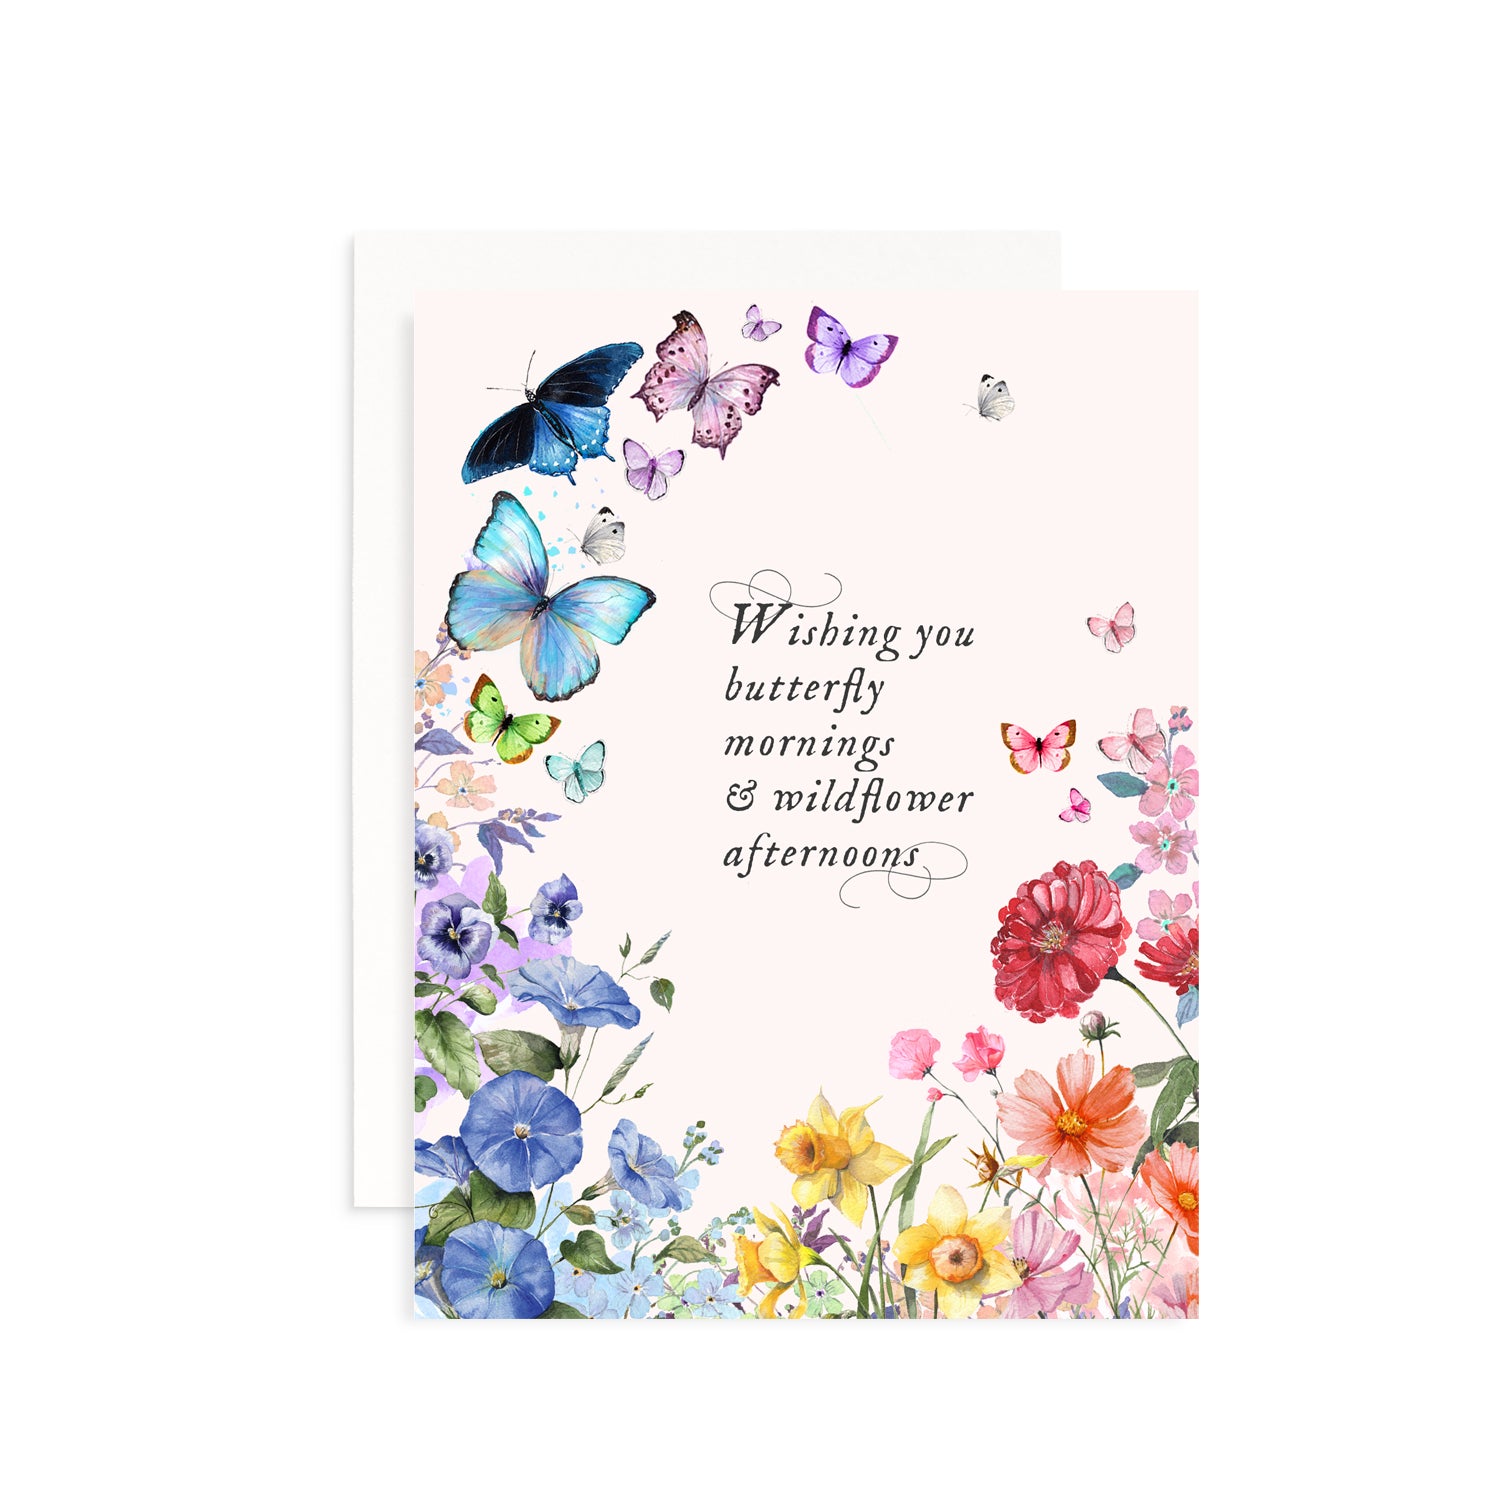 Butterfly Mornings & Wildflowers Afternoons Card